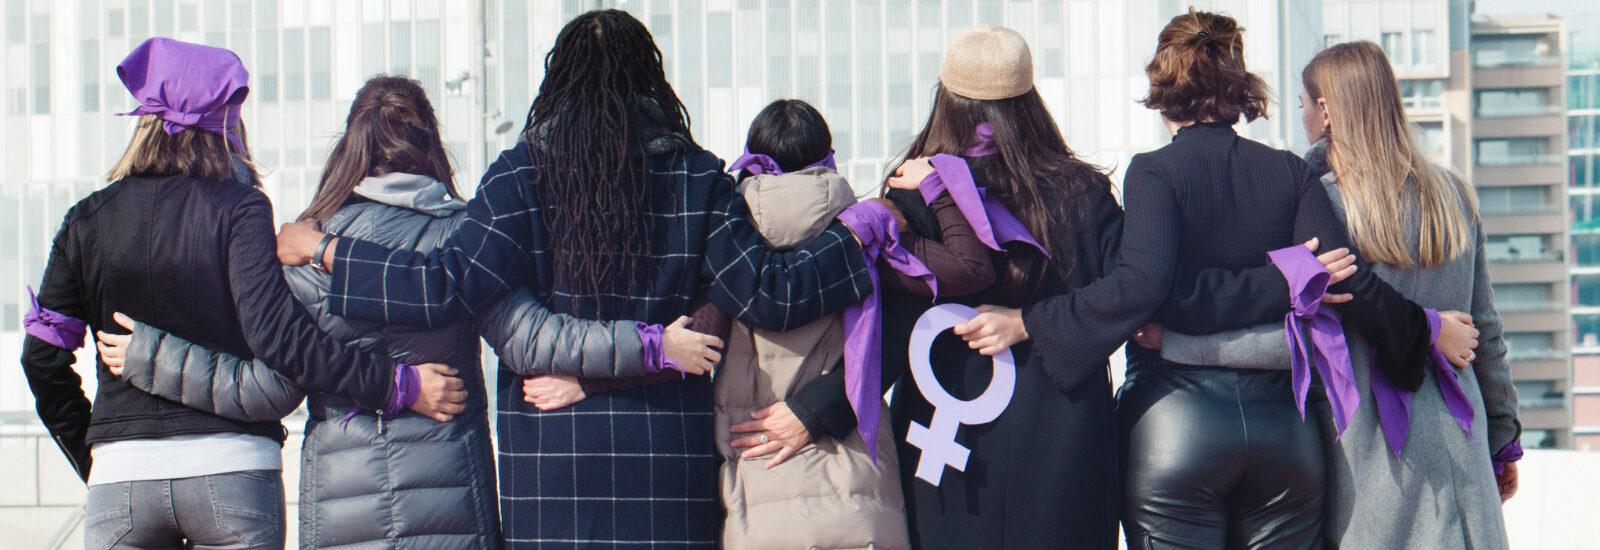 Group of women, backs to the camera, arms linked, wearing purple for International Women's Day